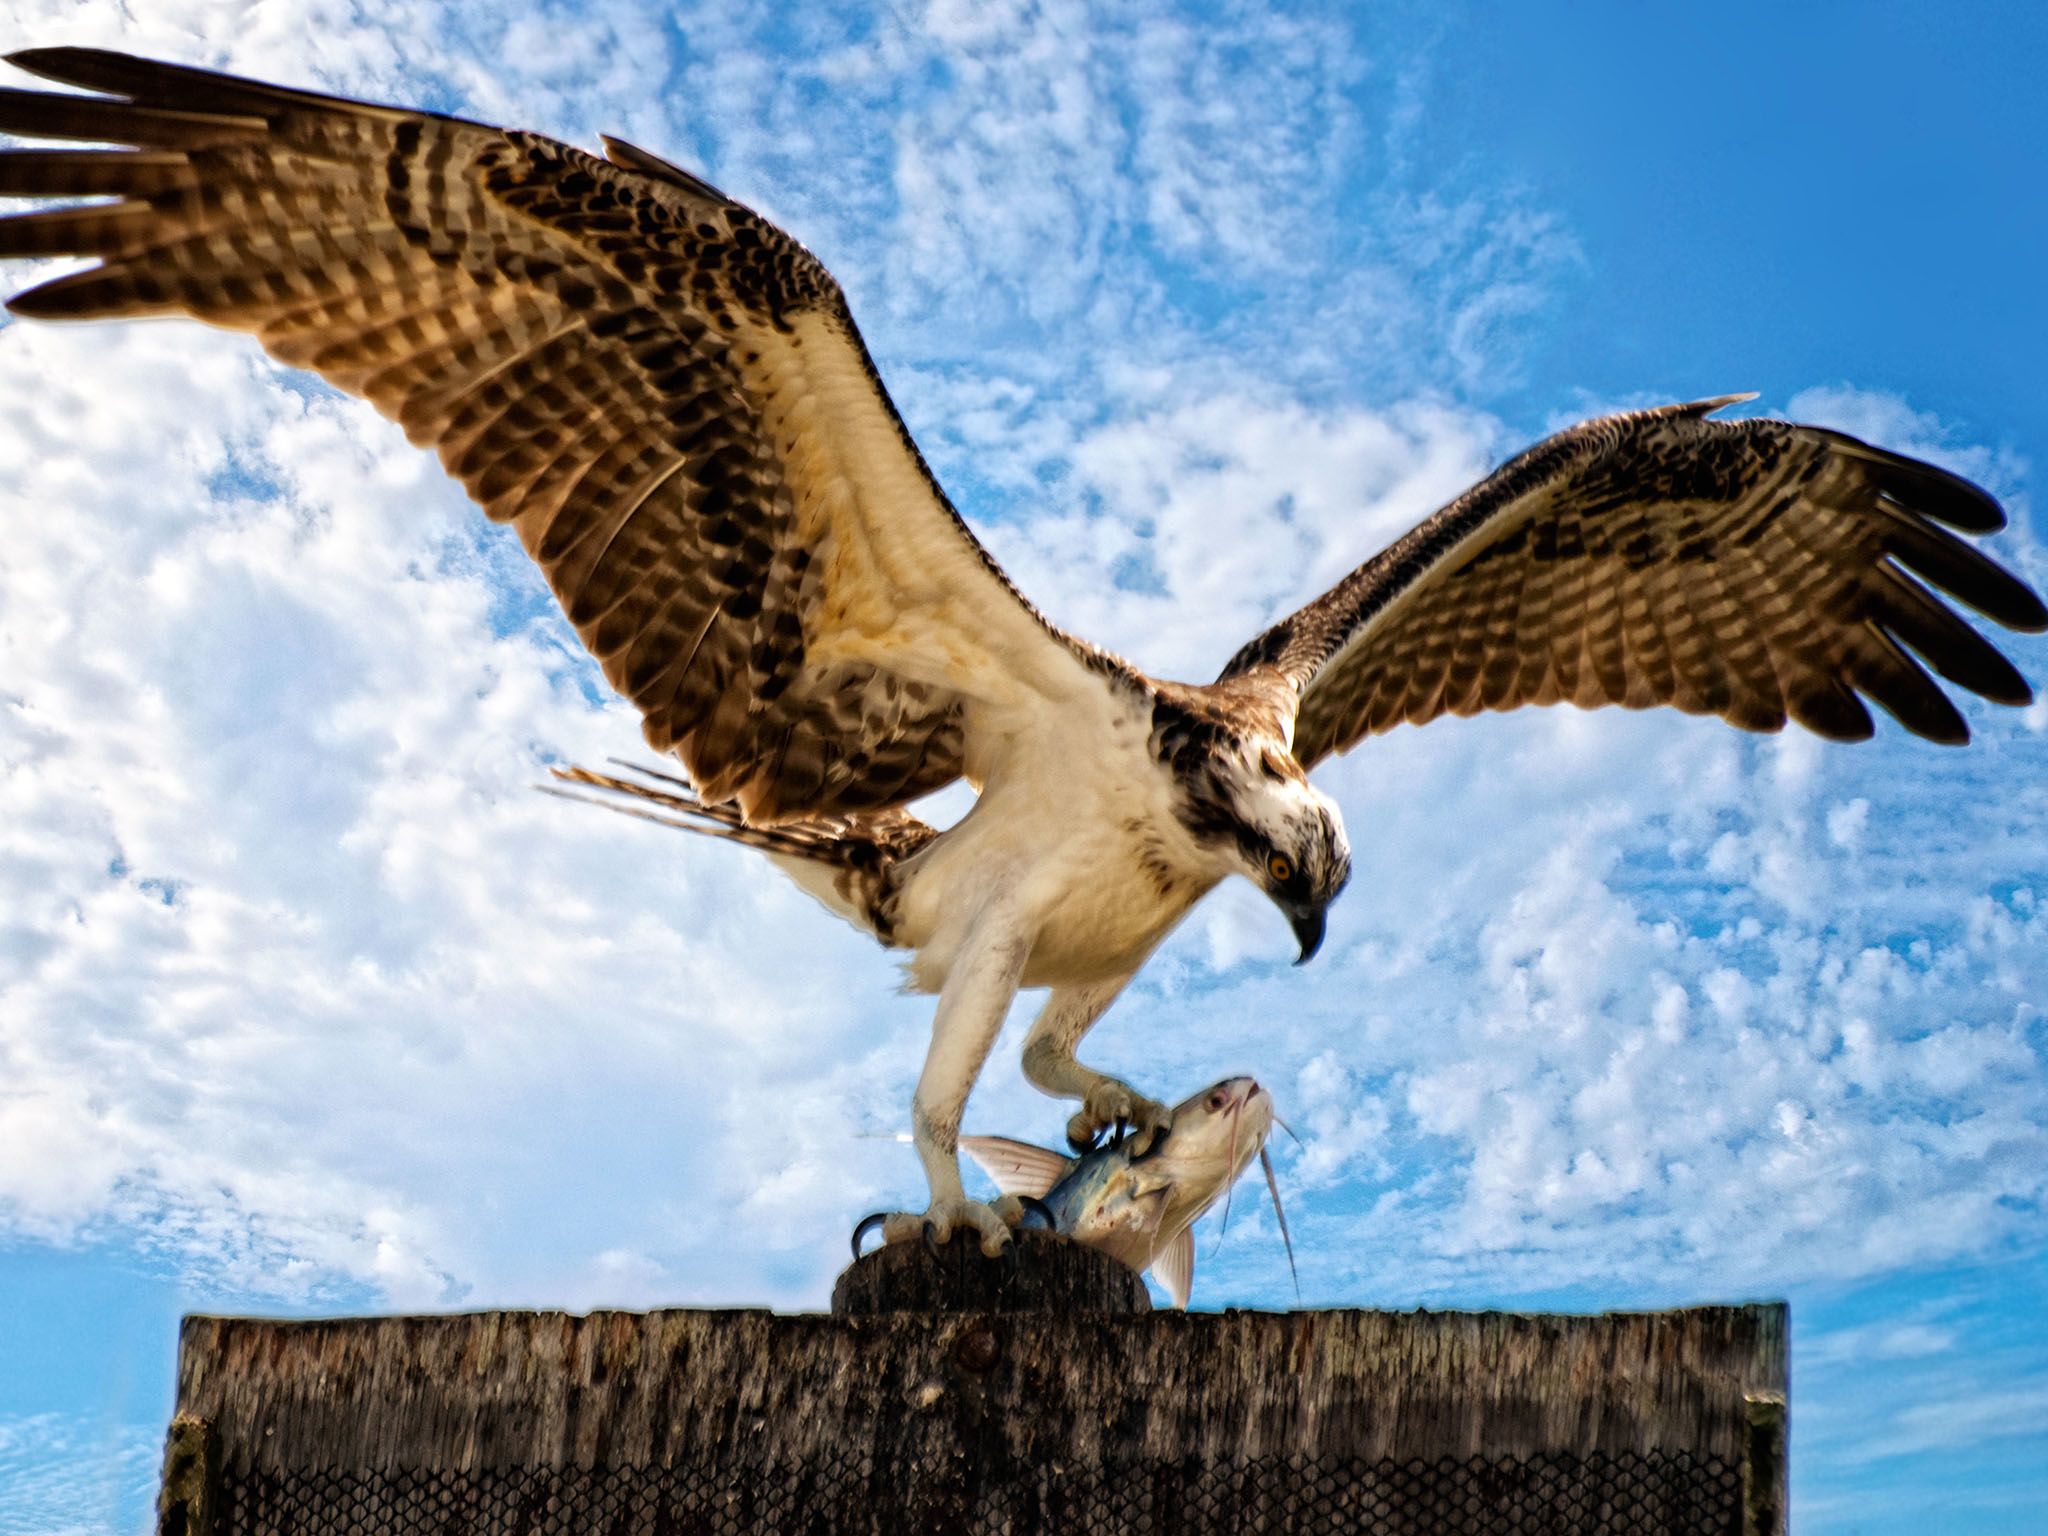 Fla.: The Osprey is also known as the âfish hawkâ since ninety percent of its diet... [Photo of the day - April 2016]